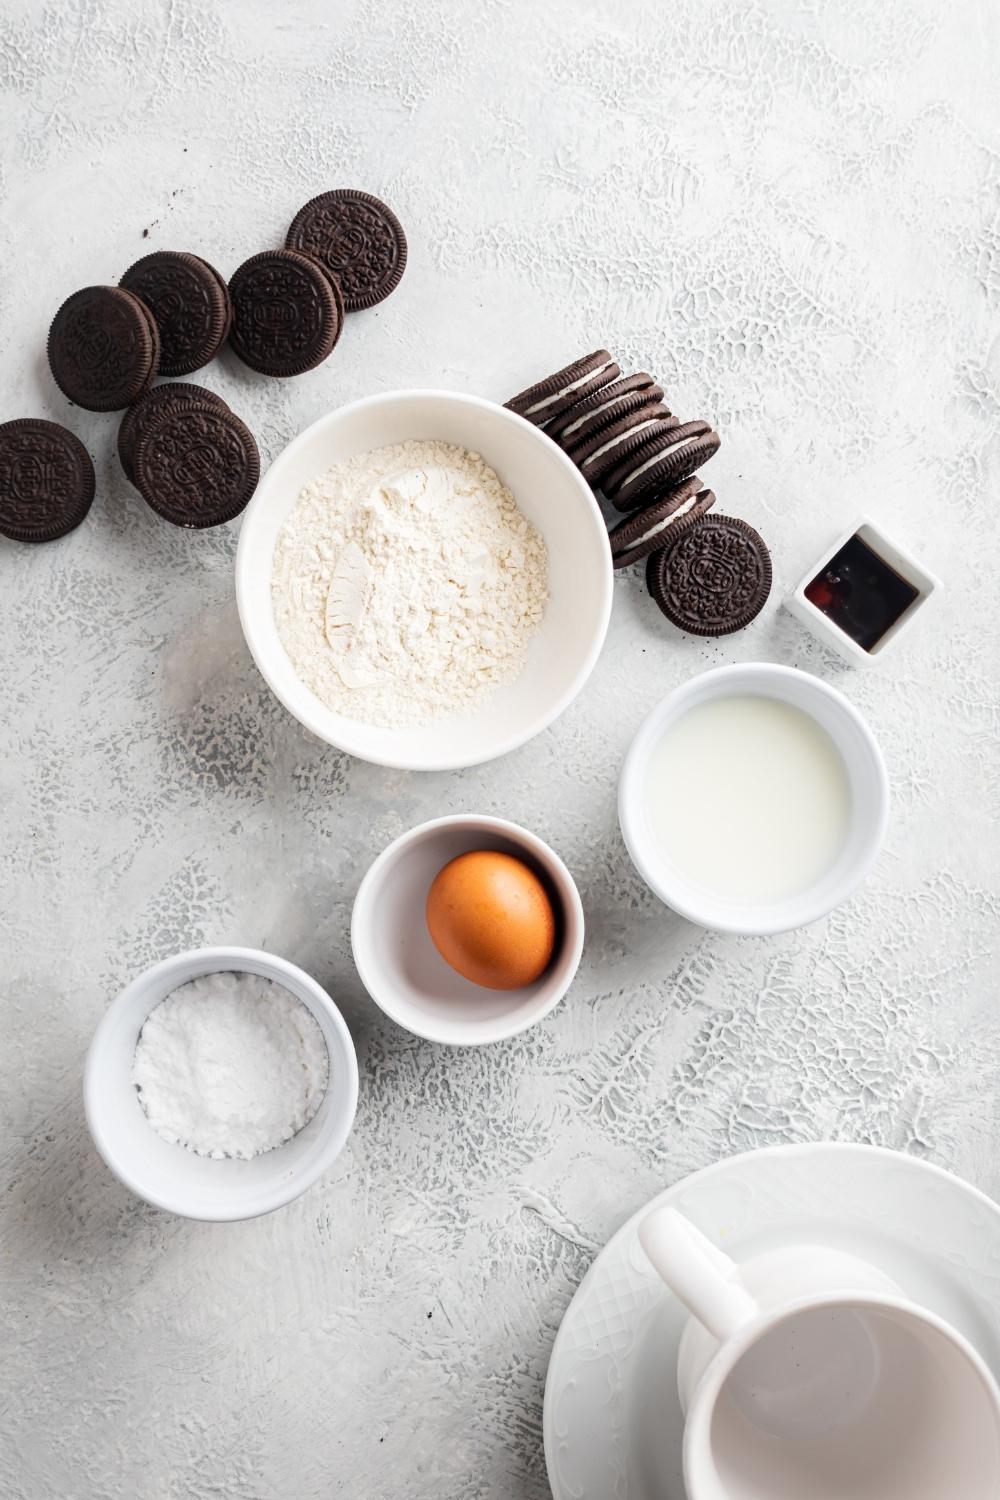 A countertop with one bowl of pancake powder mix, a bowl of milk, a bowl with an egg in it, a bowl with powdered sugar, and a bowl of vanilla extract. Oreos surround the bowls.